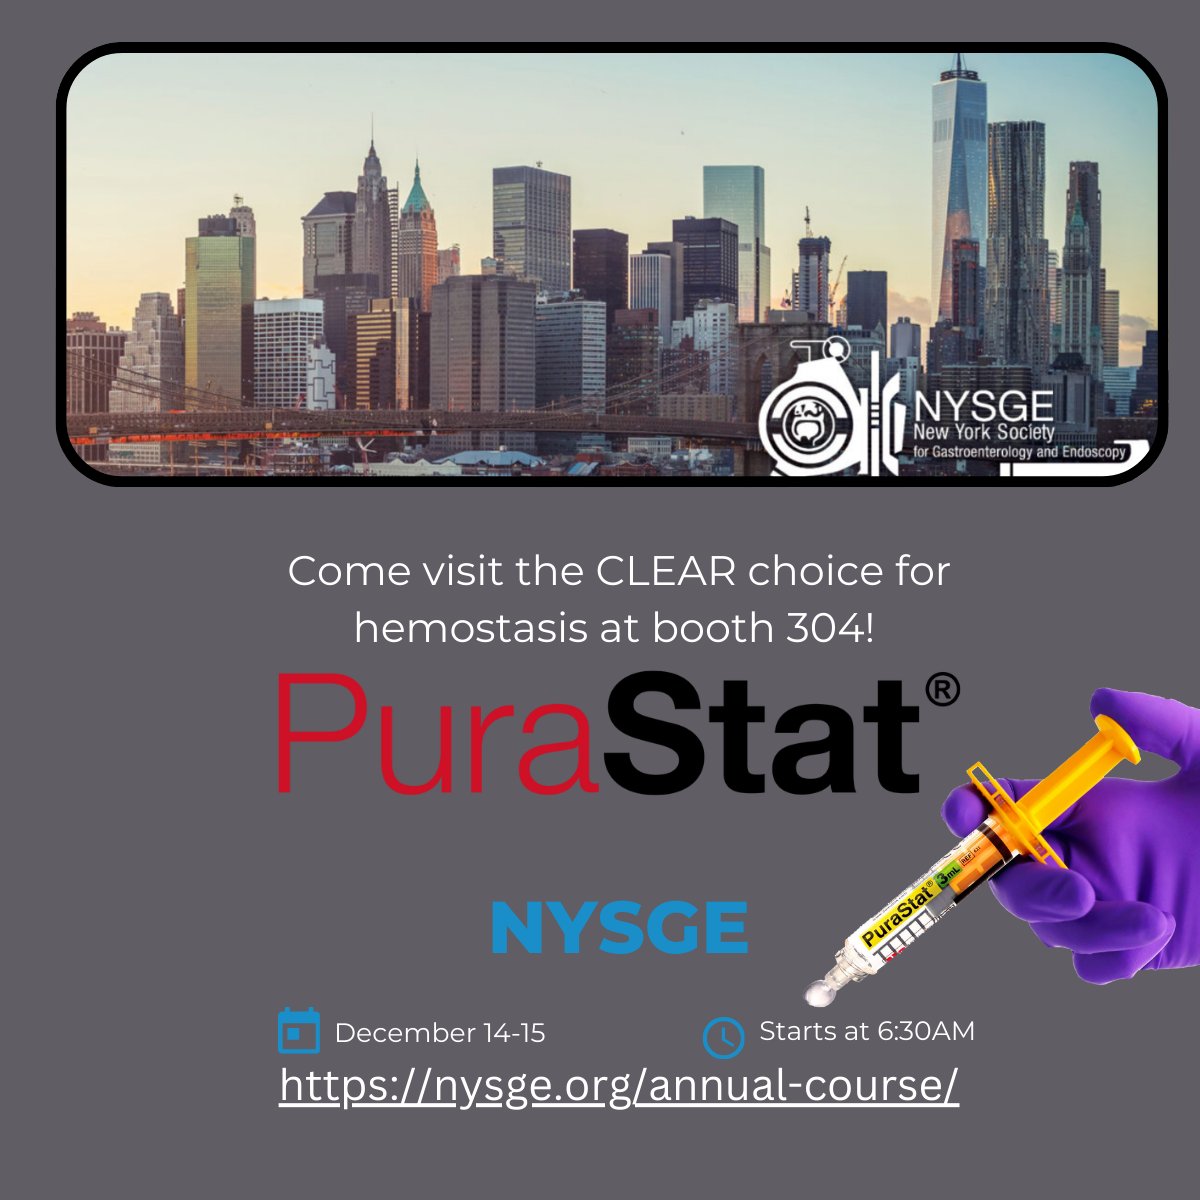 3-D Matrix is very excited to be at the @NYSGE annual course later this week! Come visit the *clear* choice for hemostasis at booth 304! Make sure to click the link below to see the faculty, and the course schedule as well! #PuraStat #GItwitter